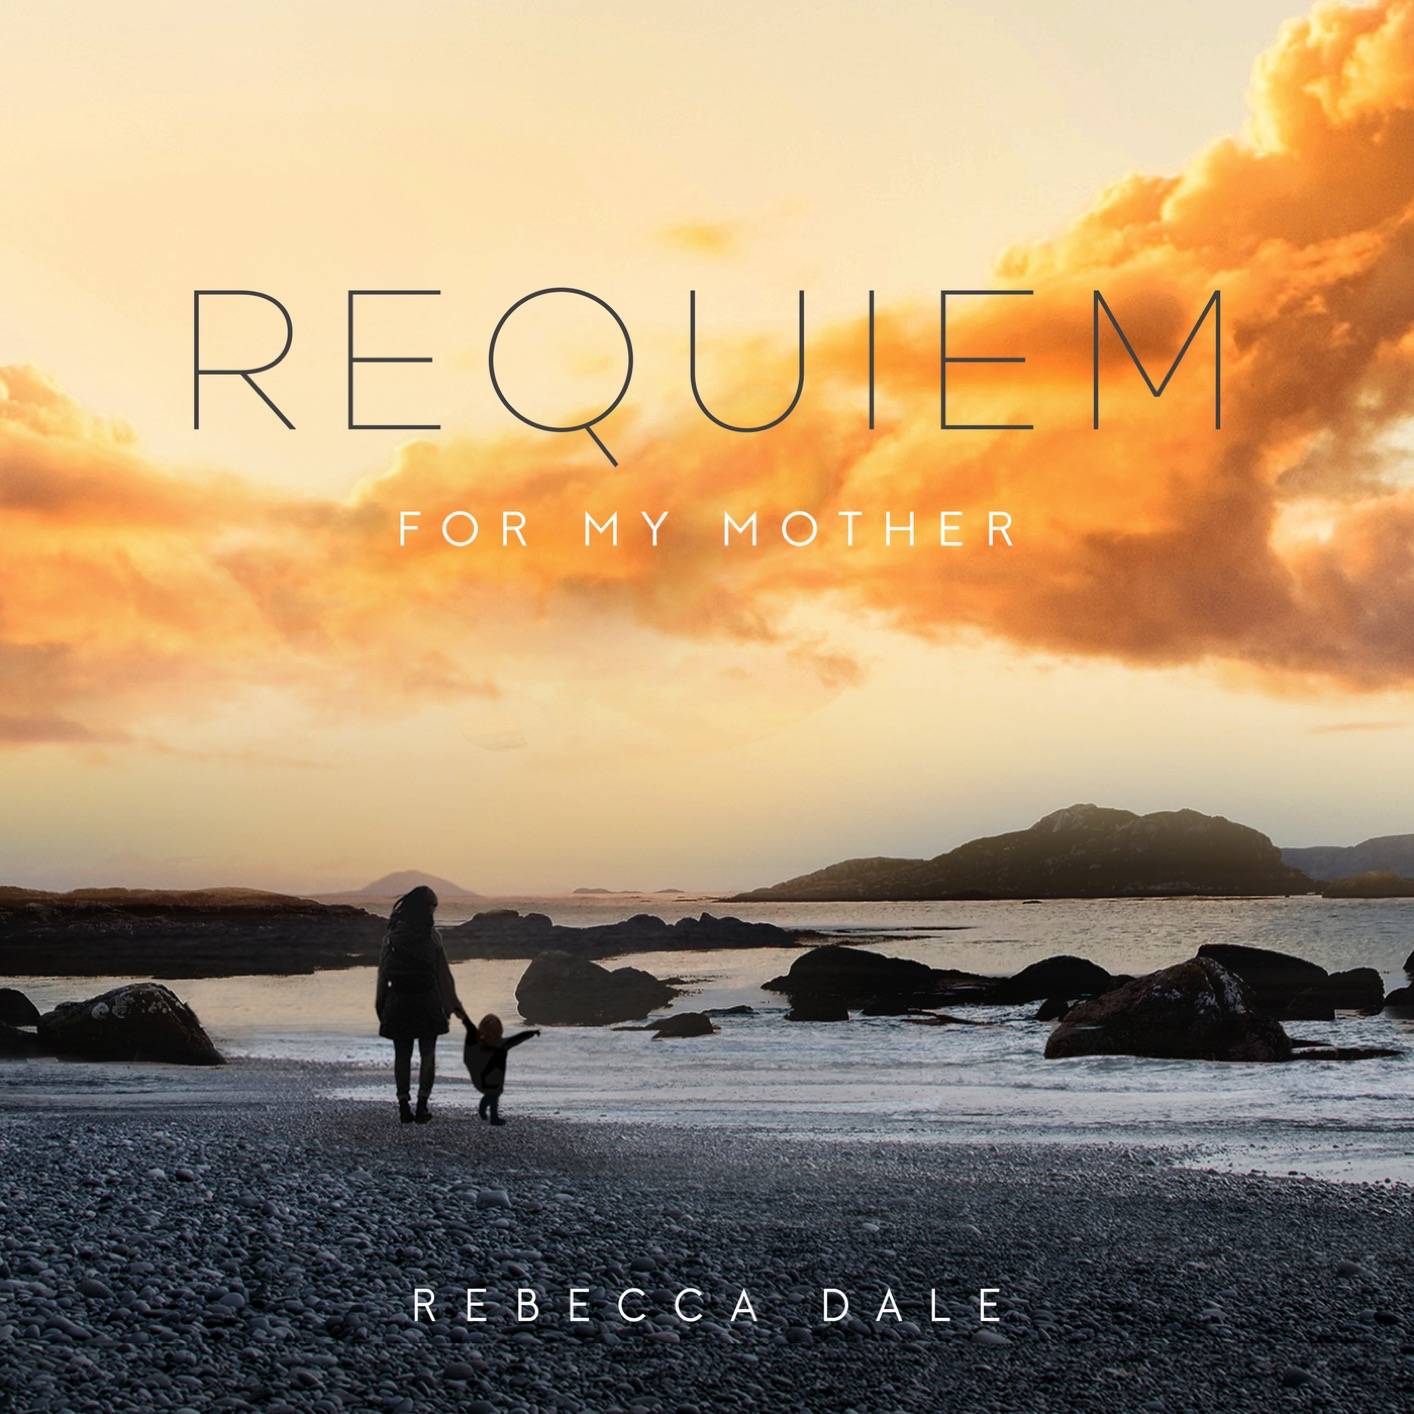 Royal Liverpool Philharmonic Orchestra - Dale: Requiem For My Mother (2018) [FLAC 24bit/96kHz]